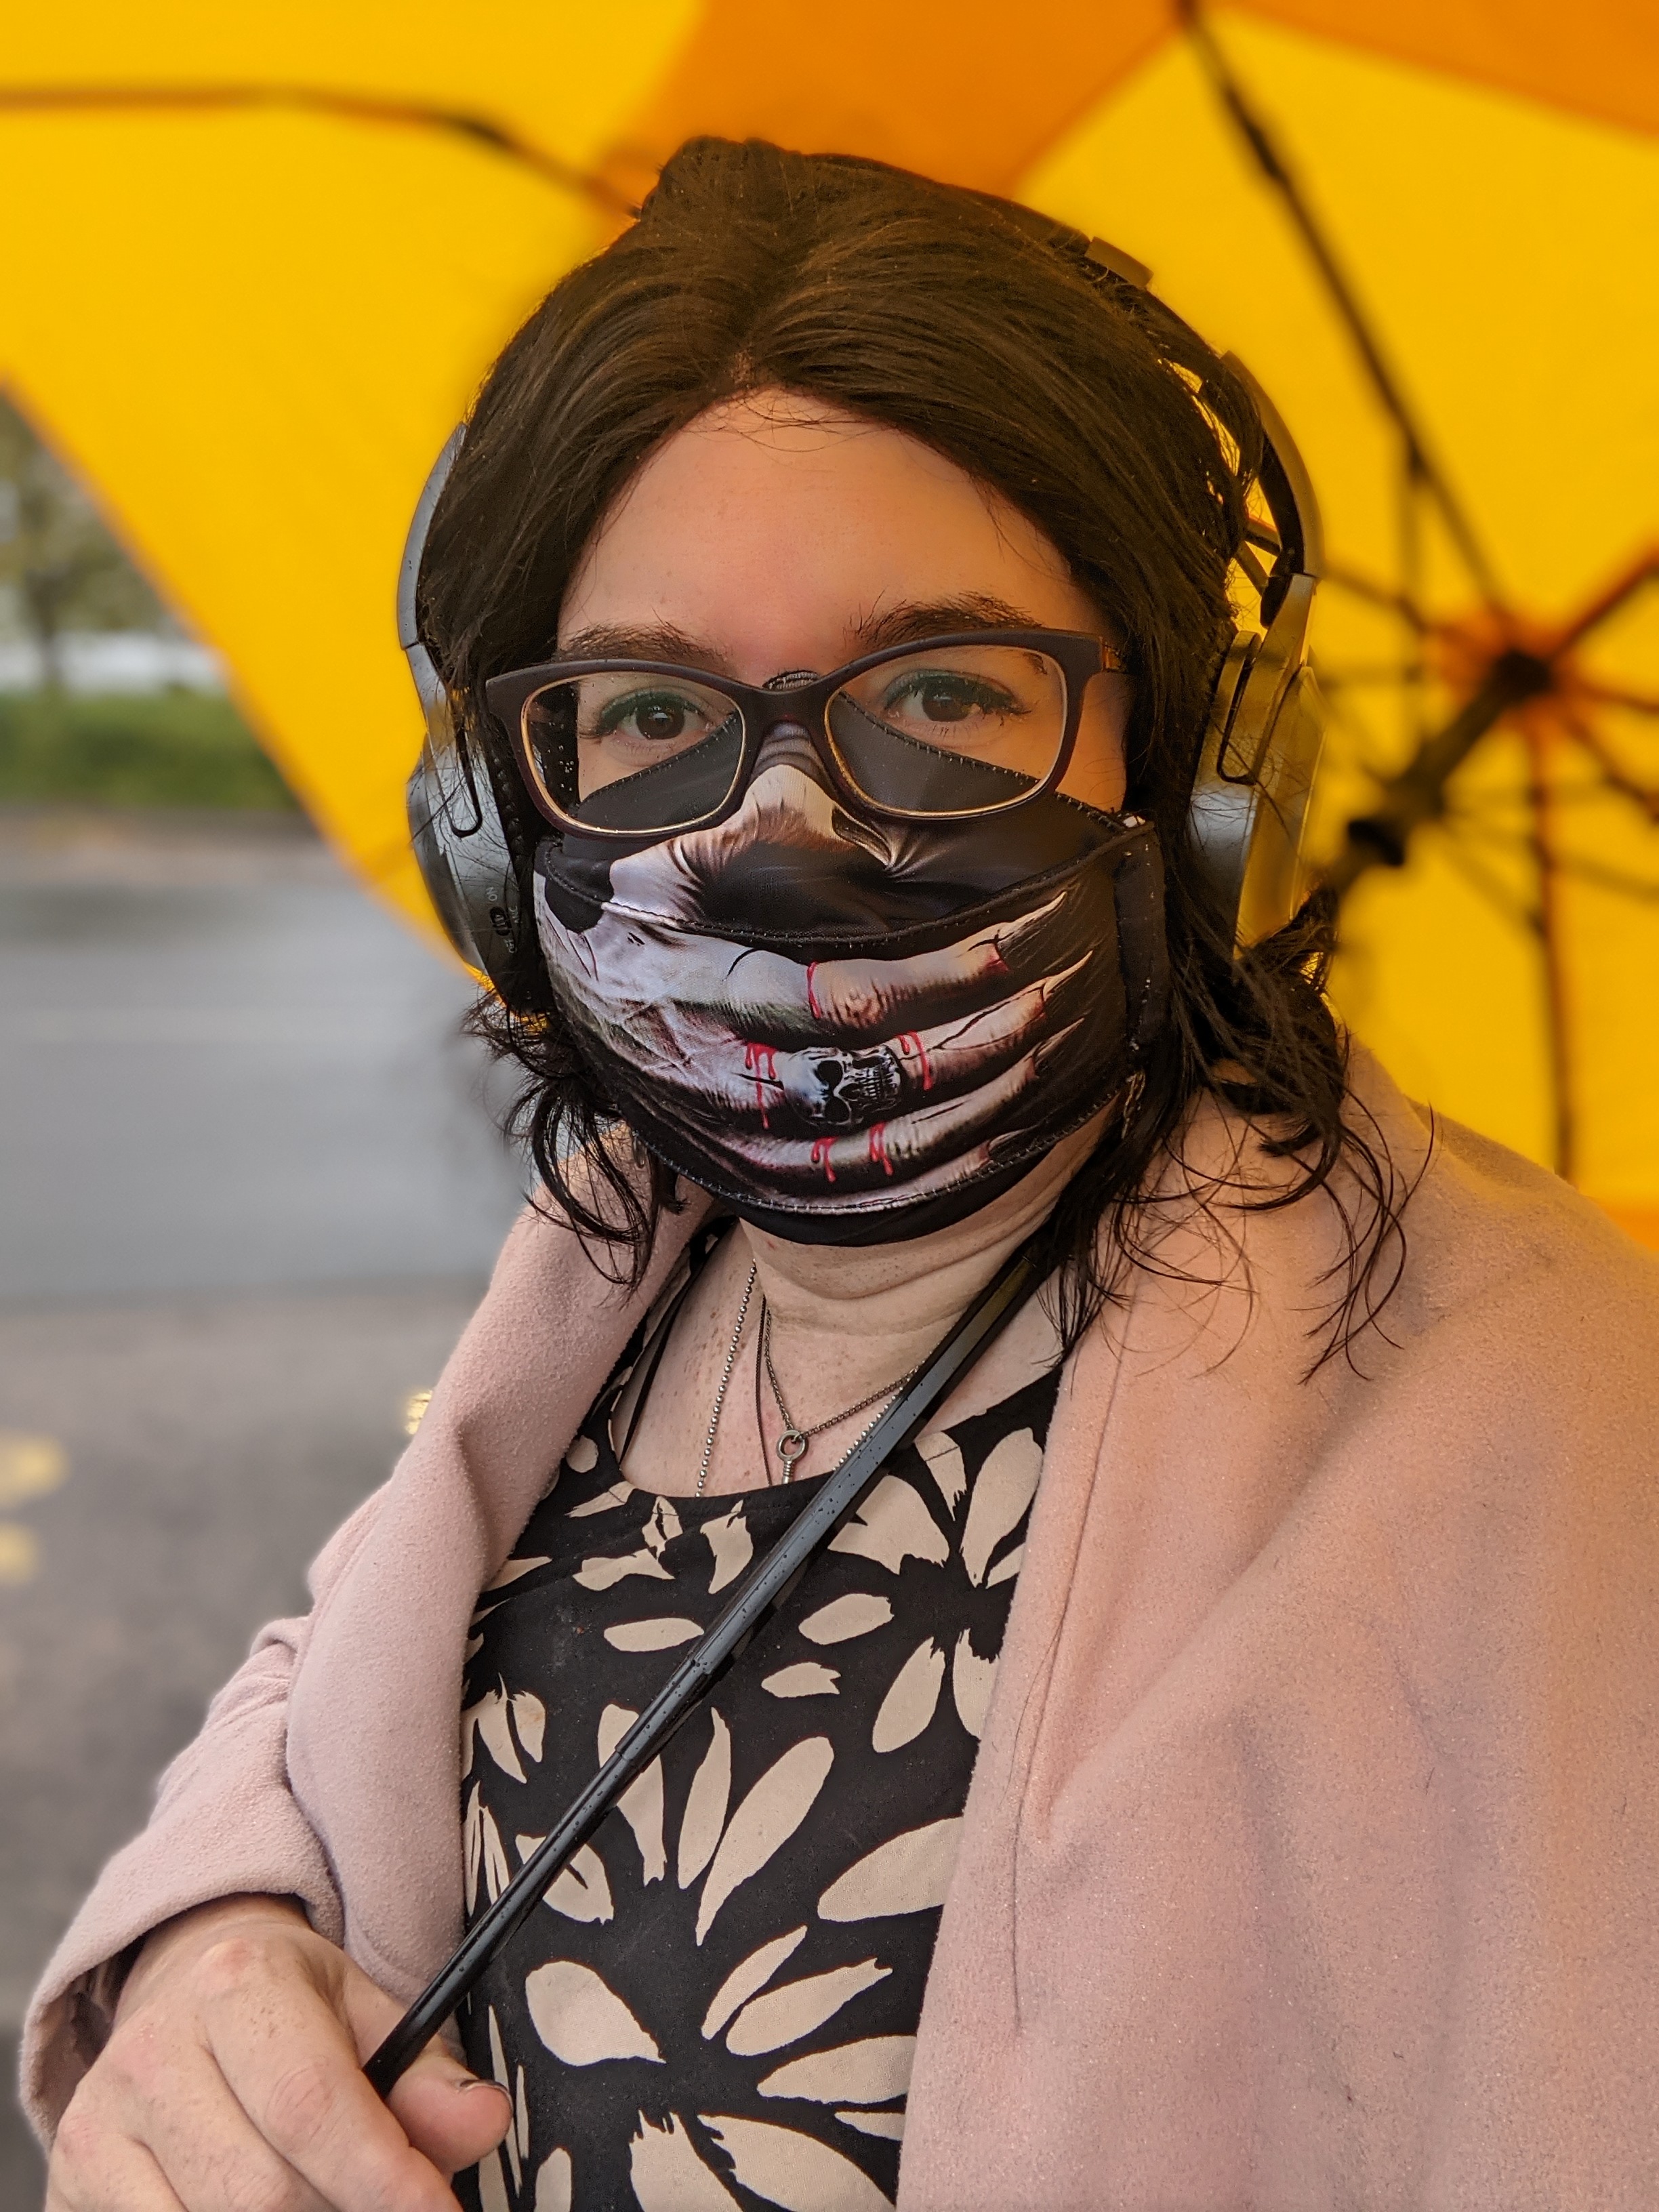 A photo of me. I have shoulder length hair held back off my face with a fabric hairband. I'm wearing a facemask that has an image of a skeletal hand on it stretching over my nose and mouth. I'm holding a yellow umbrella over myself